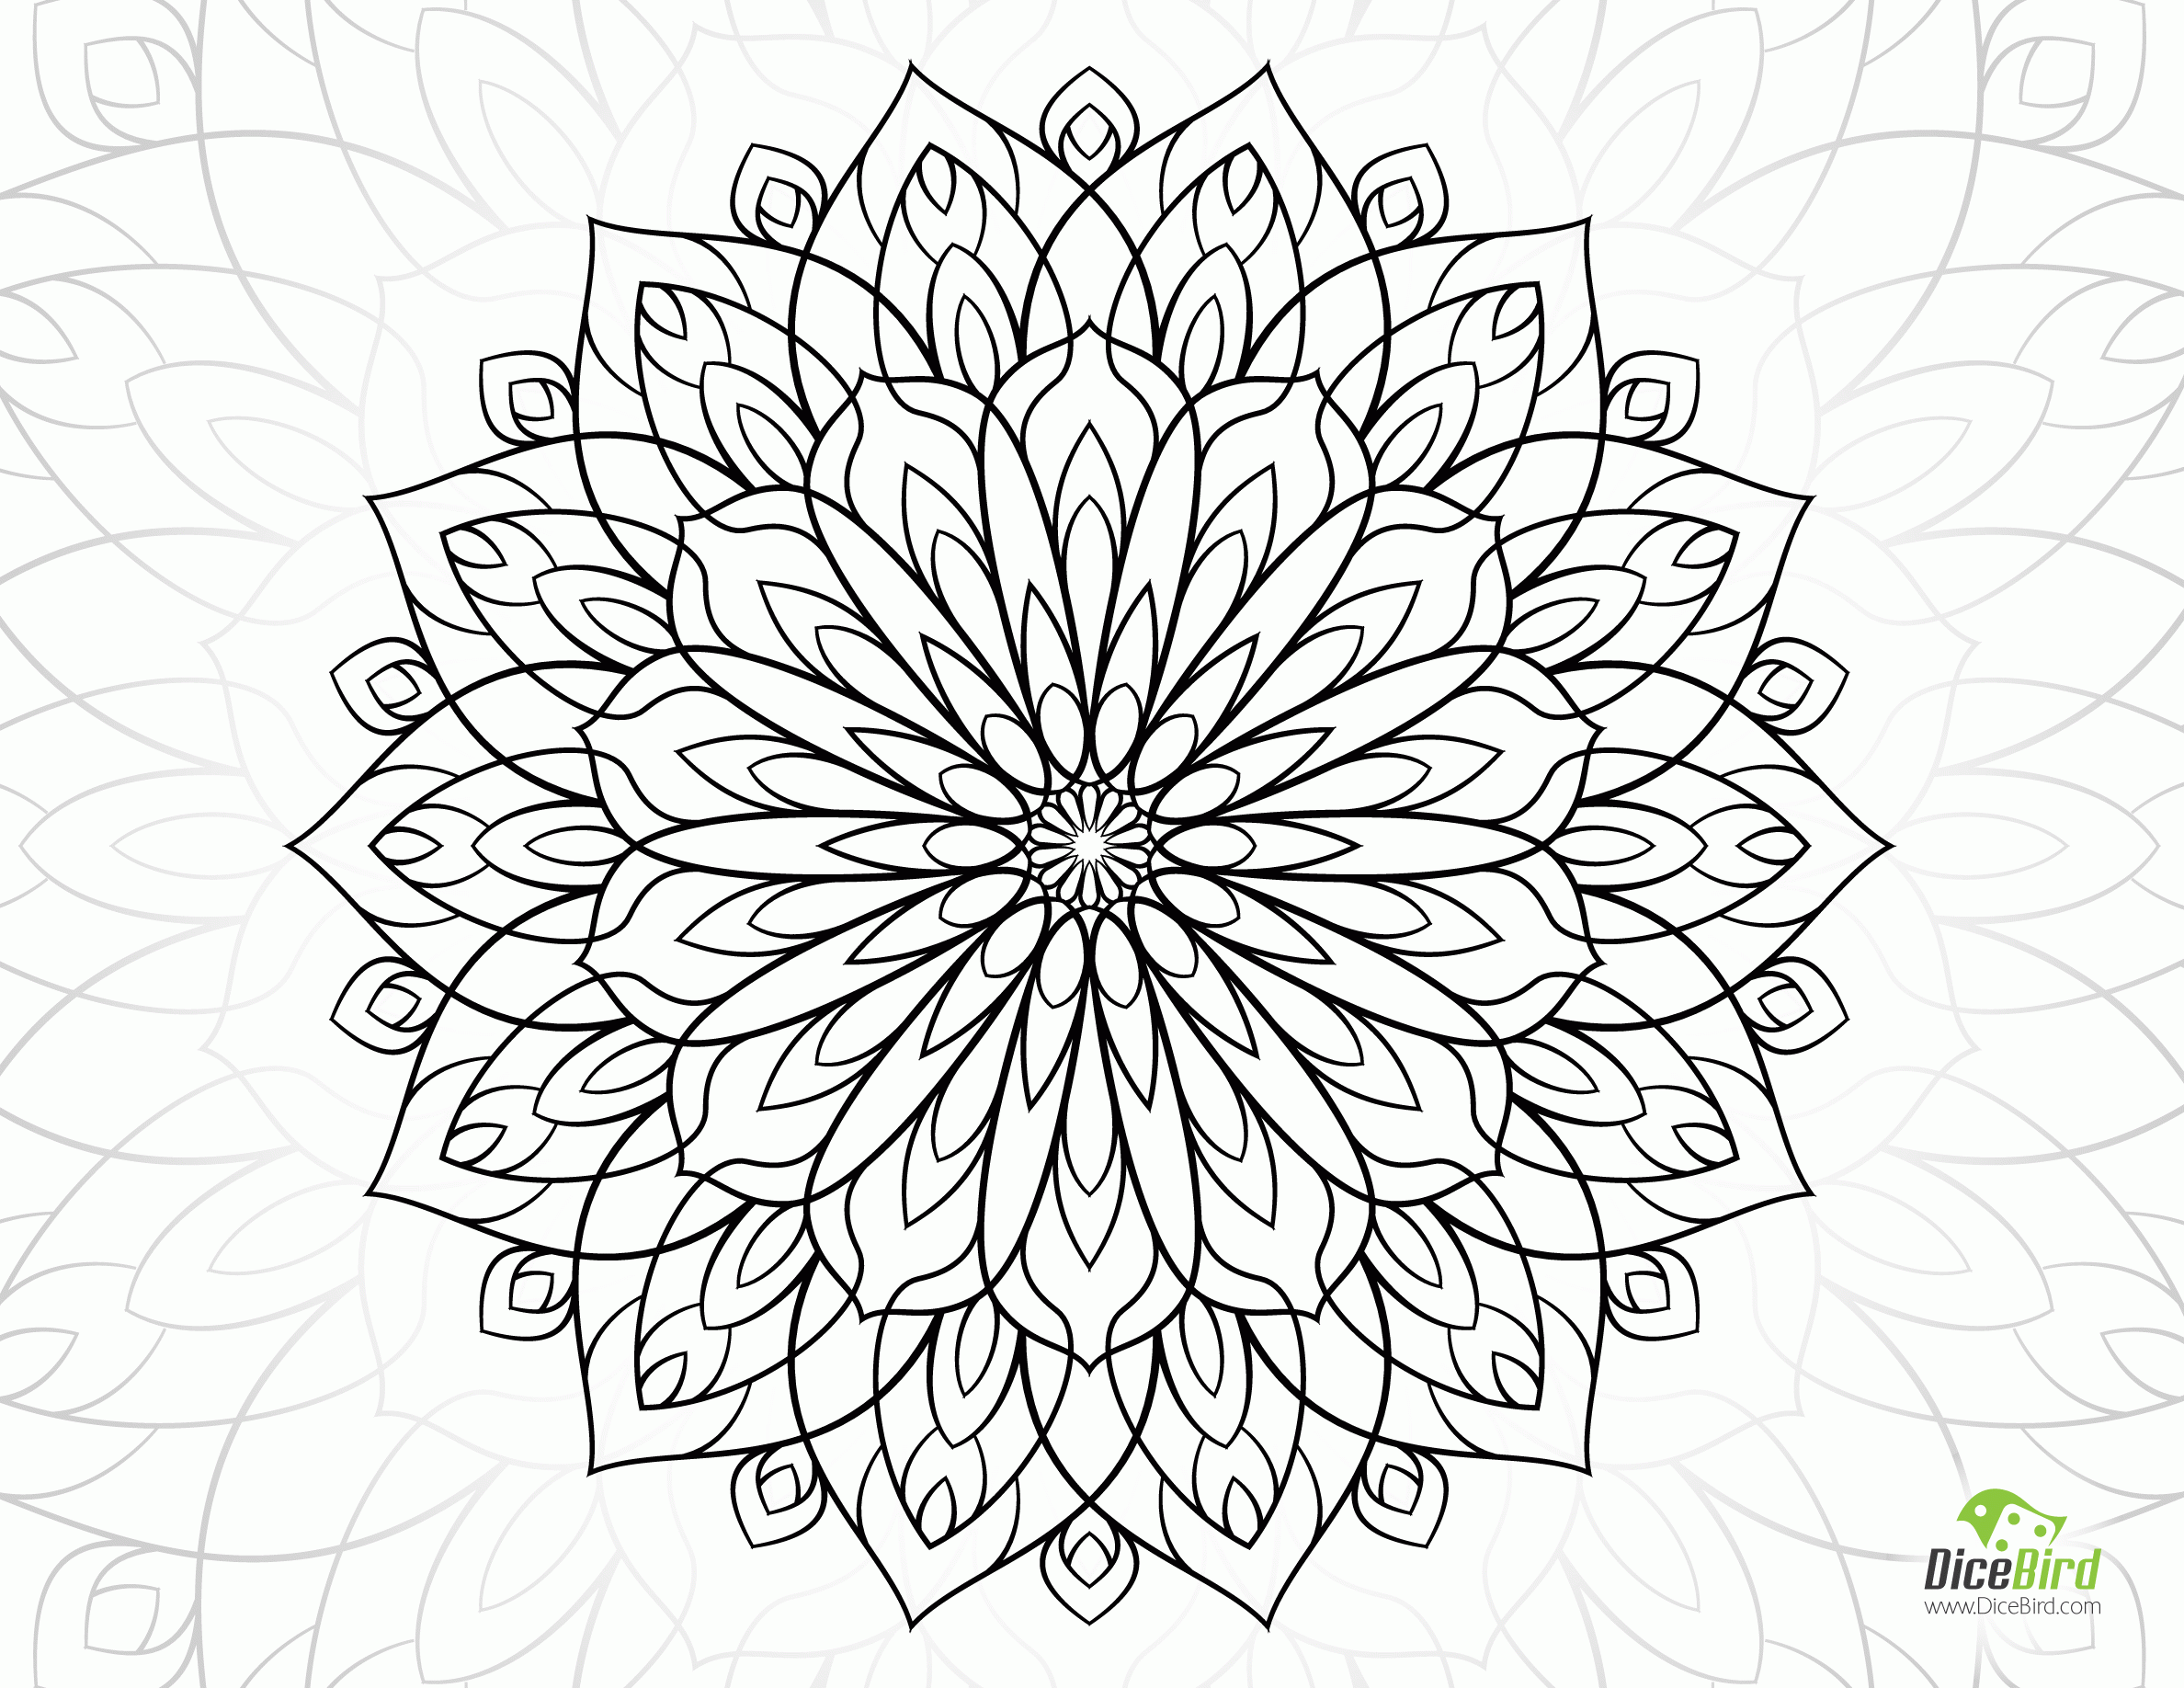 Dahlia Flower free adult coloring sheets